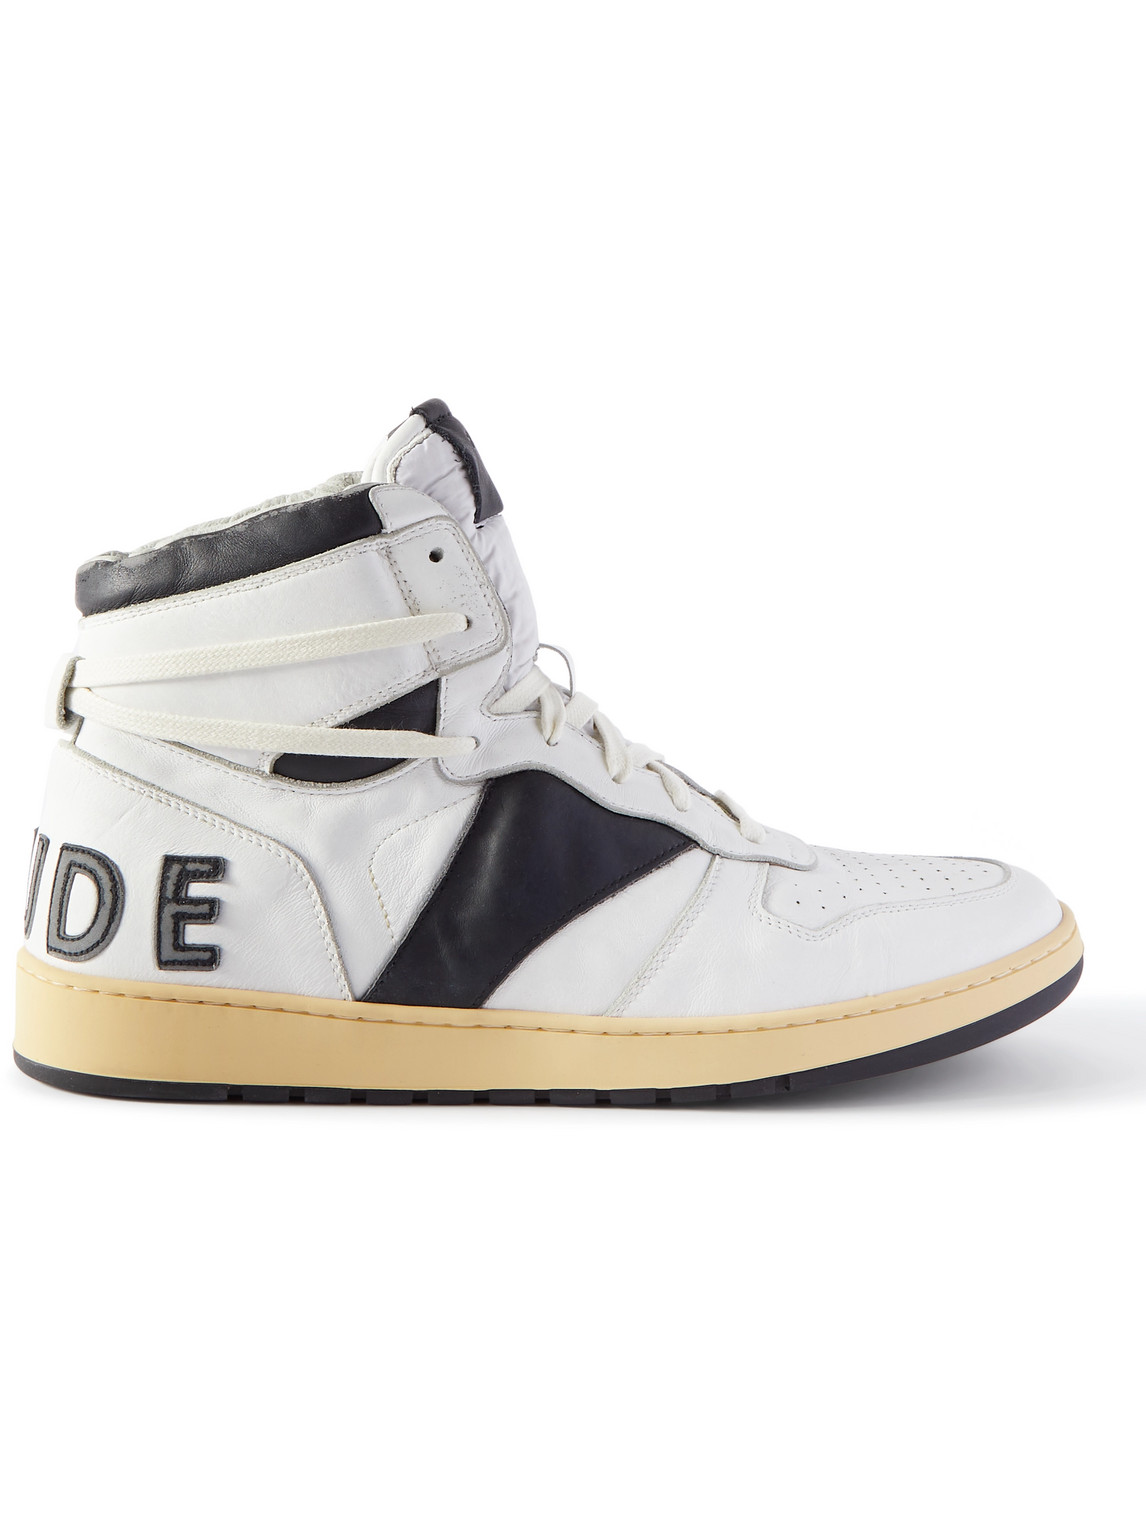 Rhecess Logo-Appliquéd Distressed Leather High-Top Sneakers